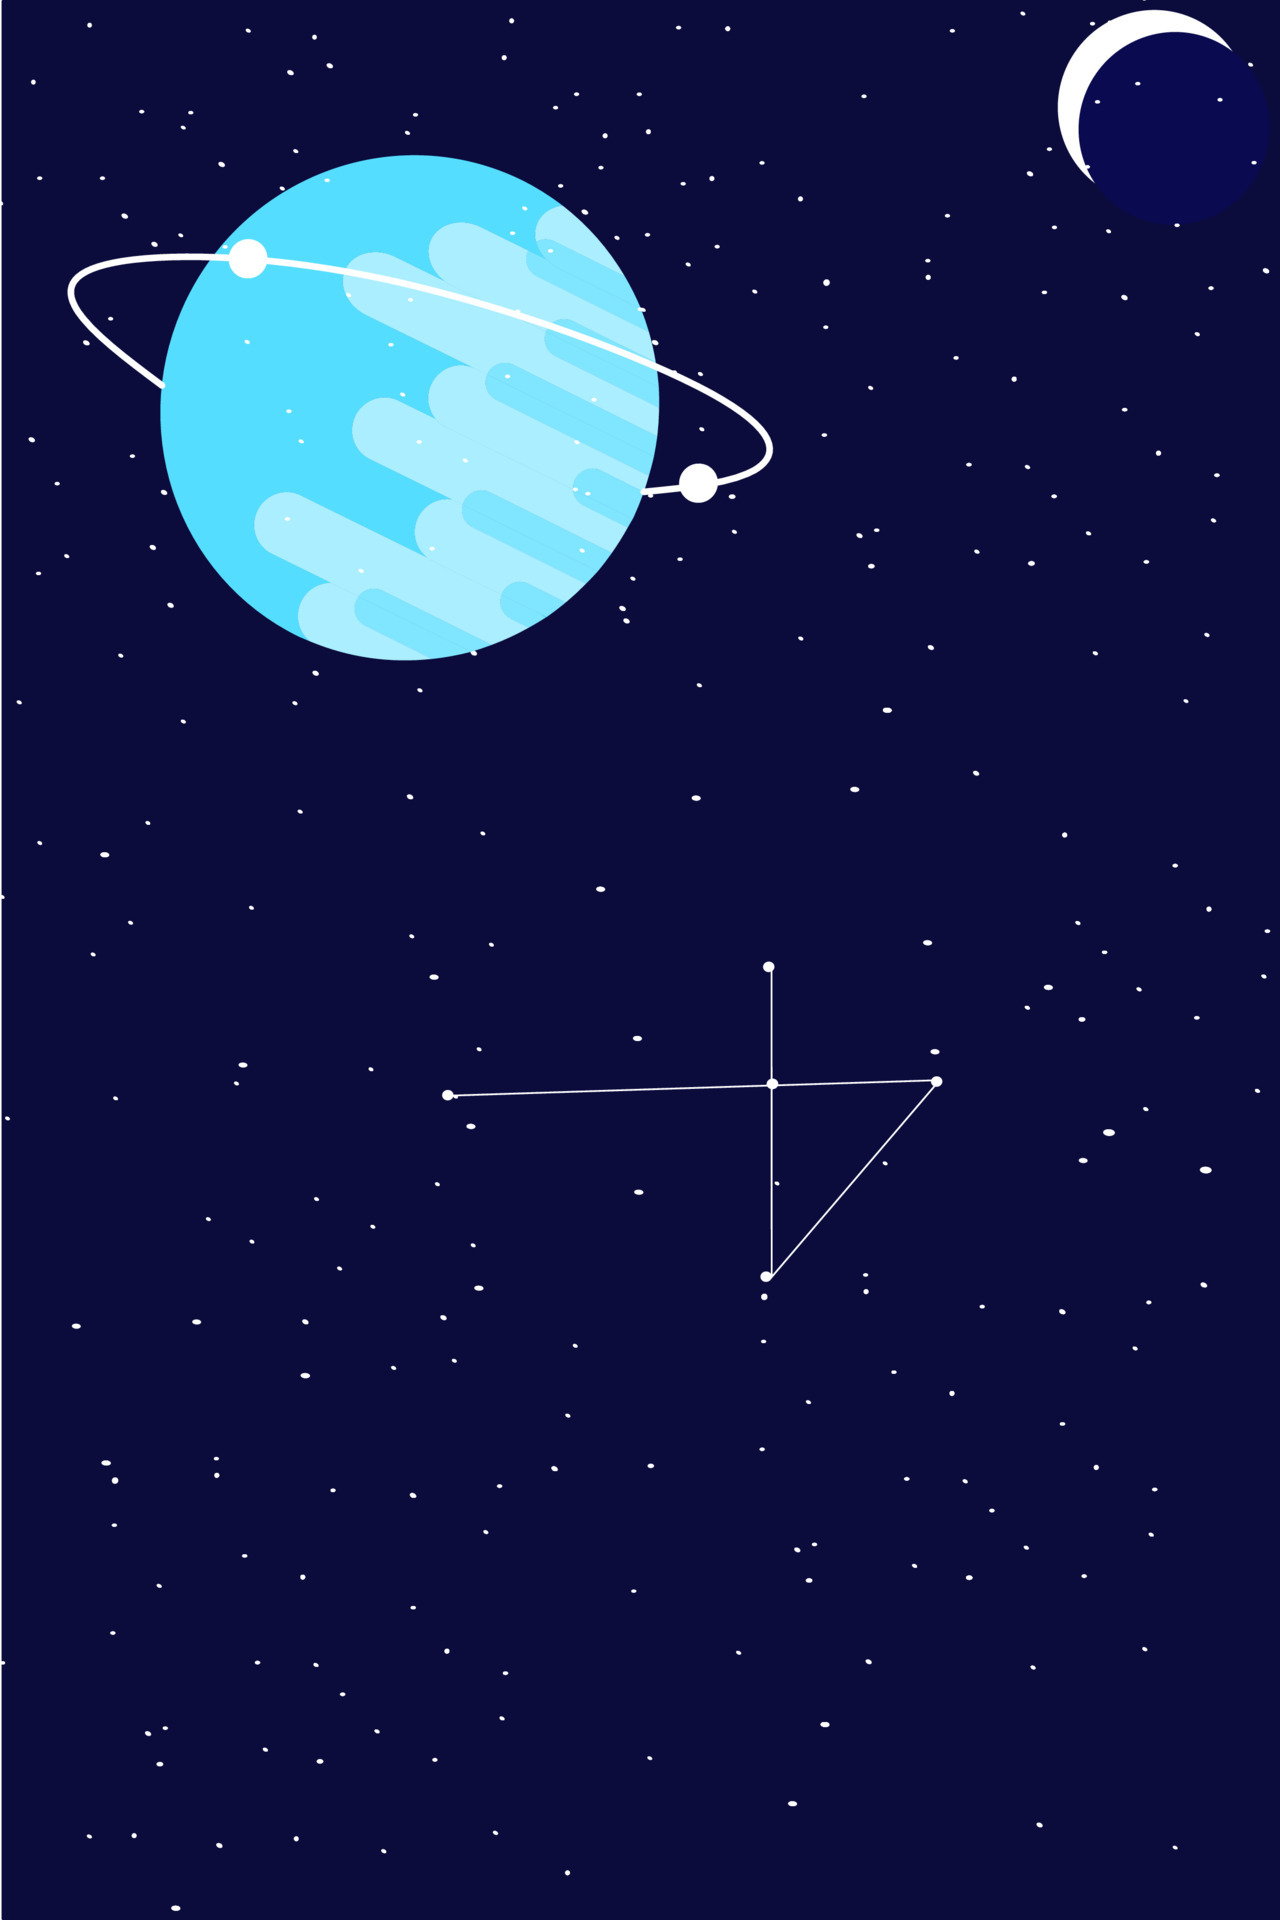 Night landscape illustration in flat style with design crescent moon and  stars in the galaxy night view abstract shape. Beautiful galaxy background.  Template for mobile phone screen saver theme 4745609 Vector Art